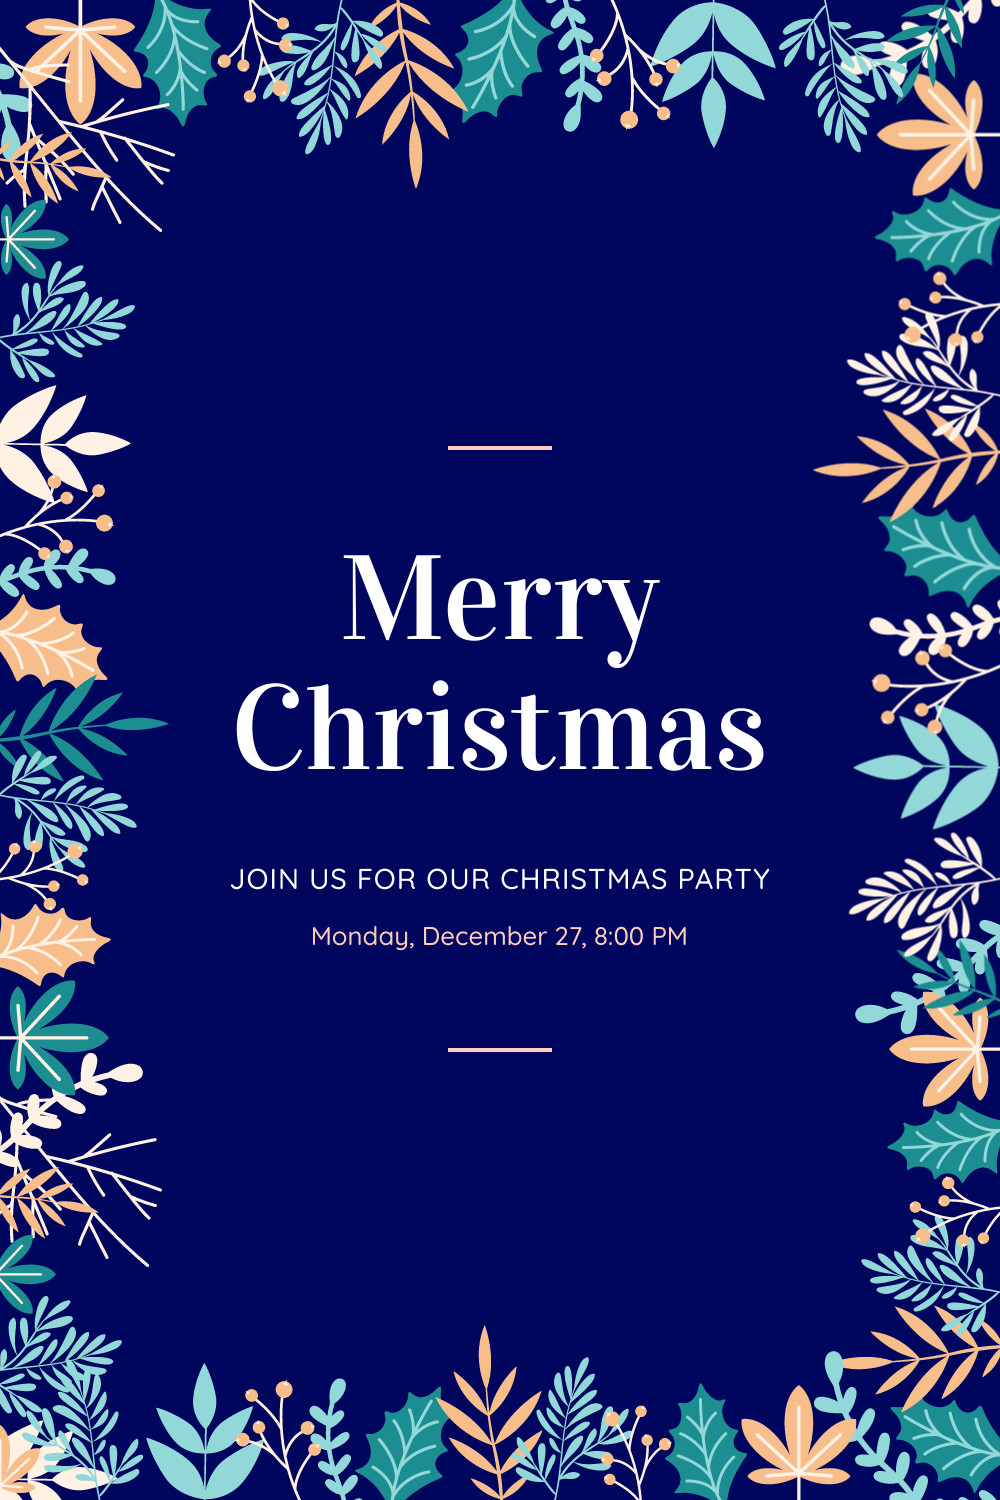 Our Christmas Party Holiday Leaves Facebook Cover 820x360